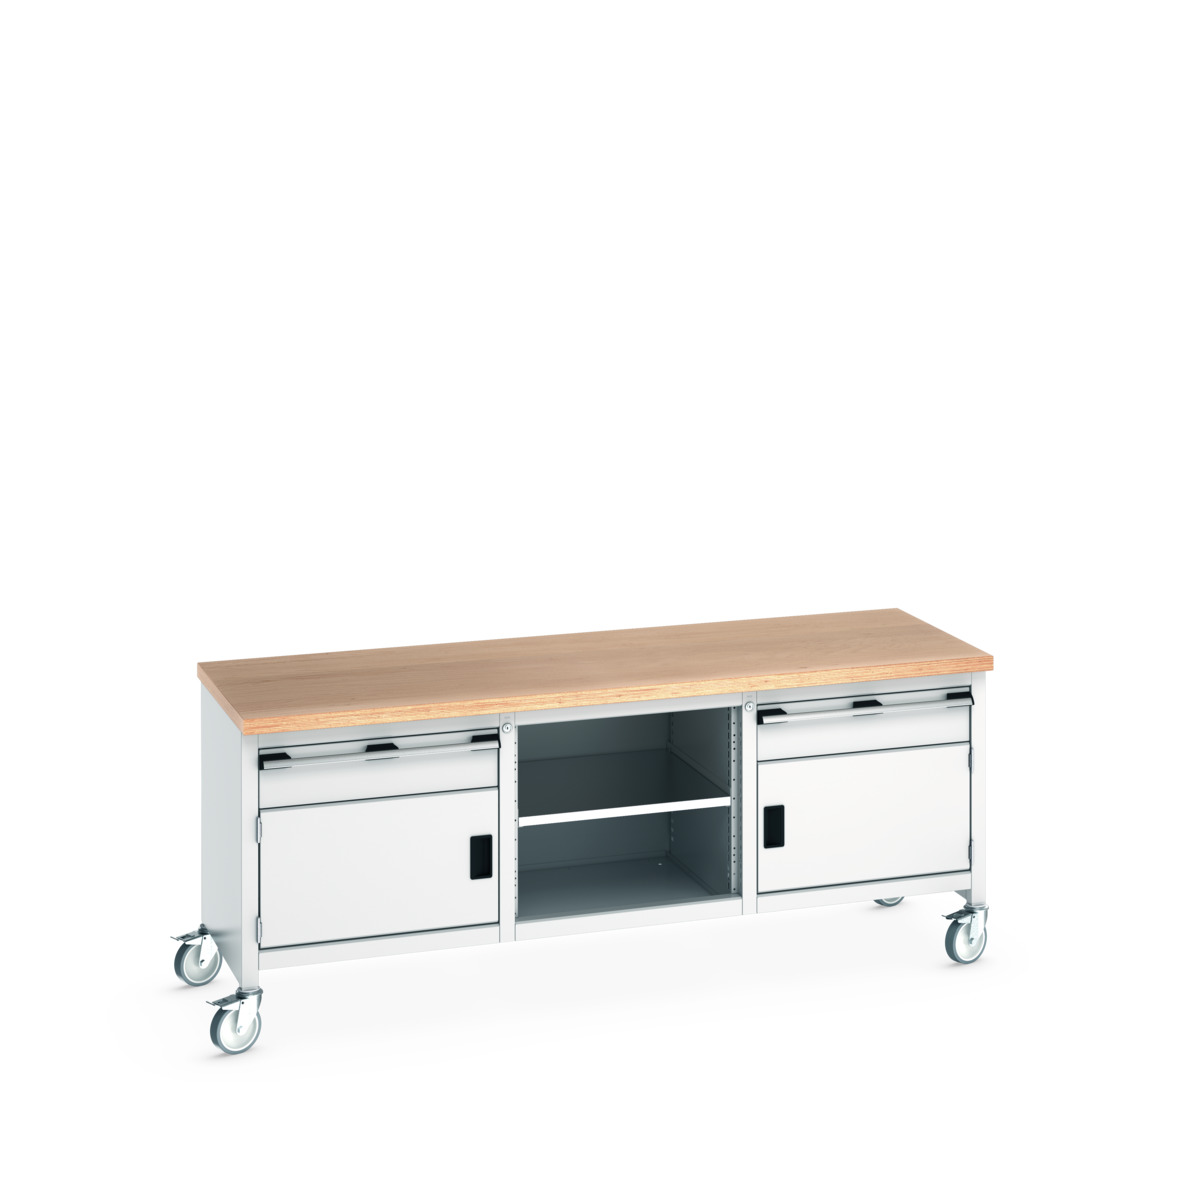 41002121.16V - cubio mobile storage bench (mpx)